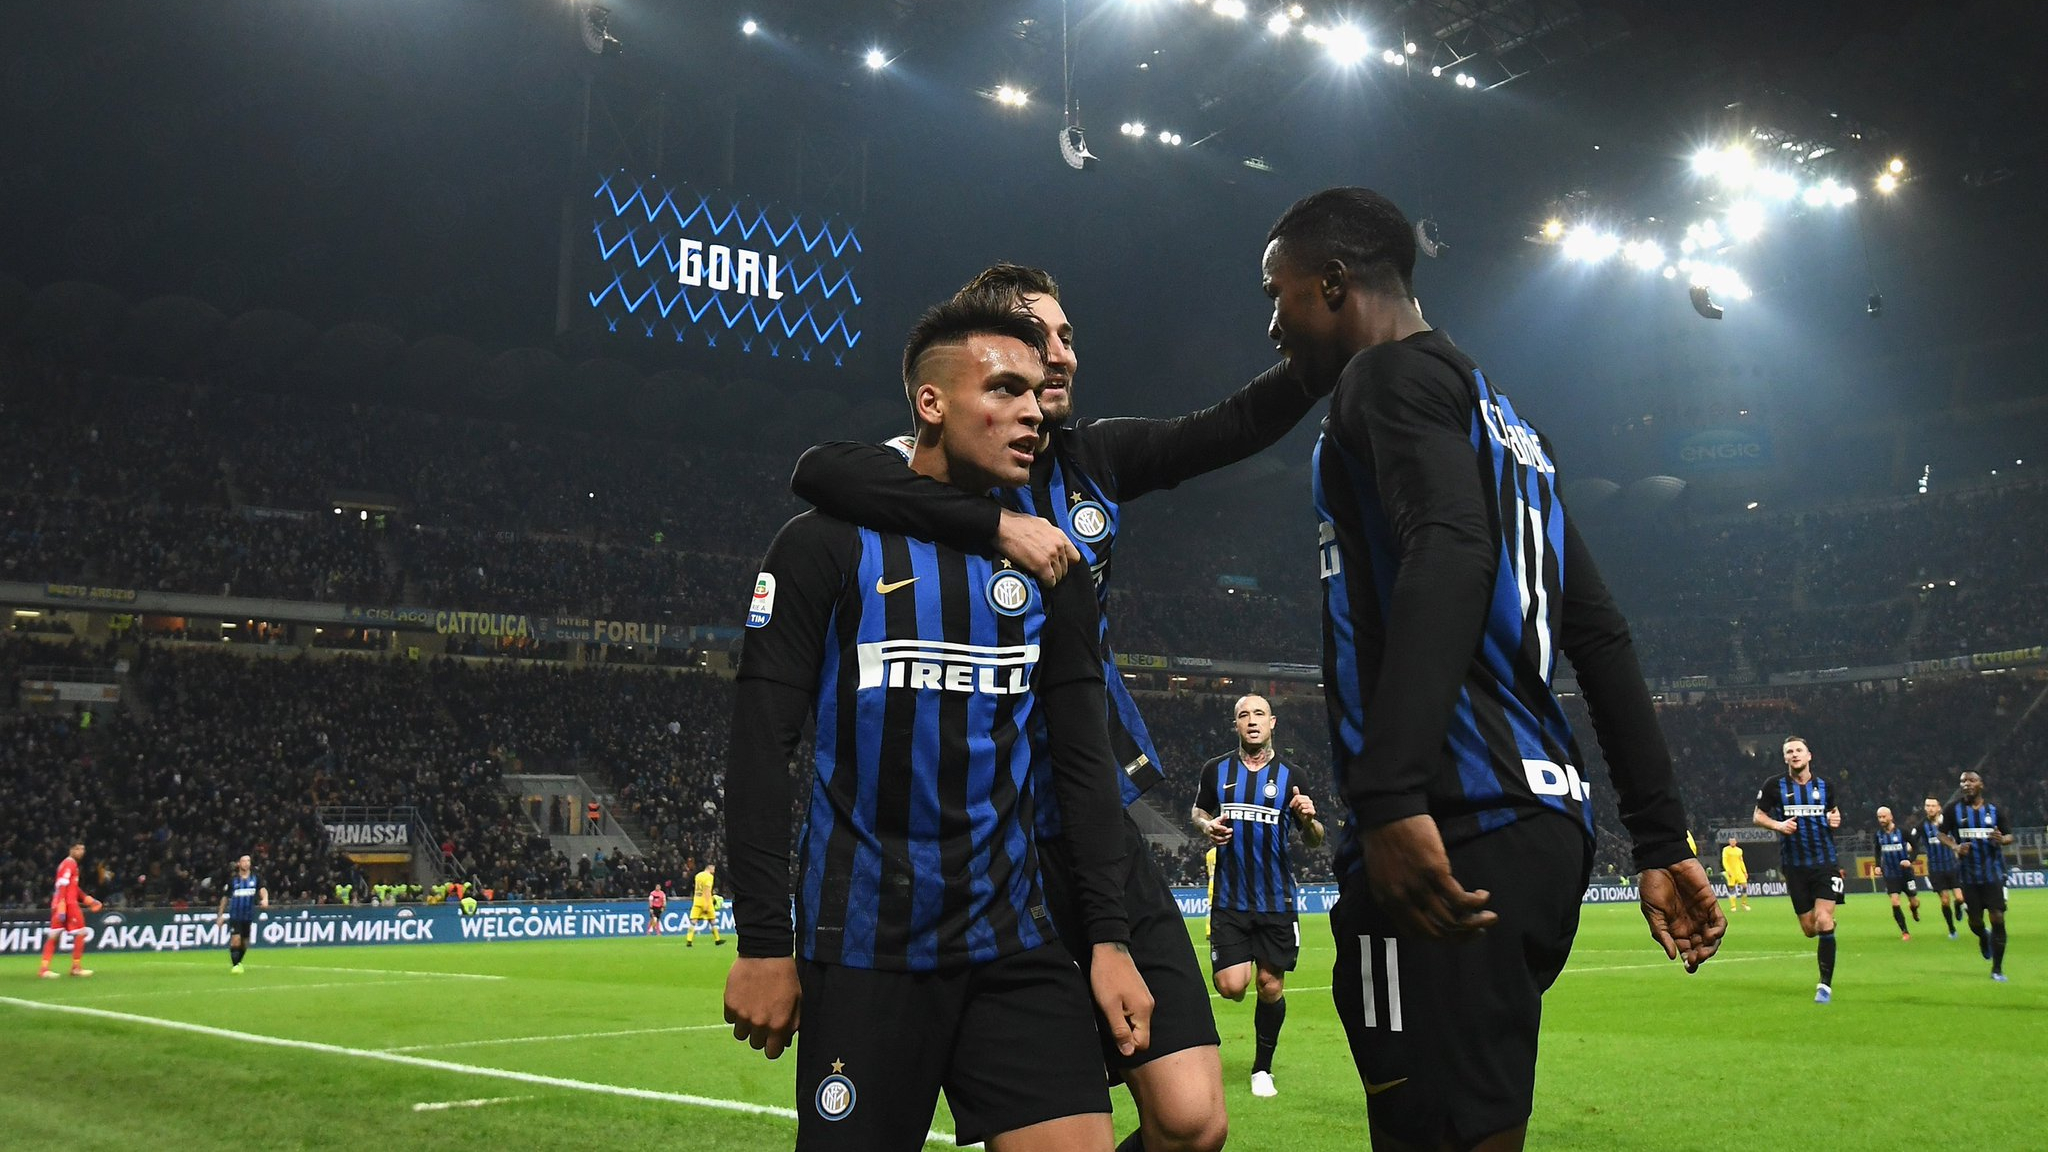 Inter Players Celebrate Lautaro Martínez' Goal In Their 3 0 Victory